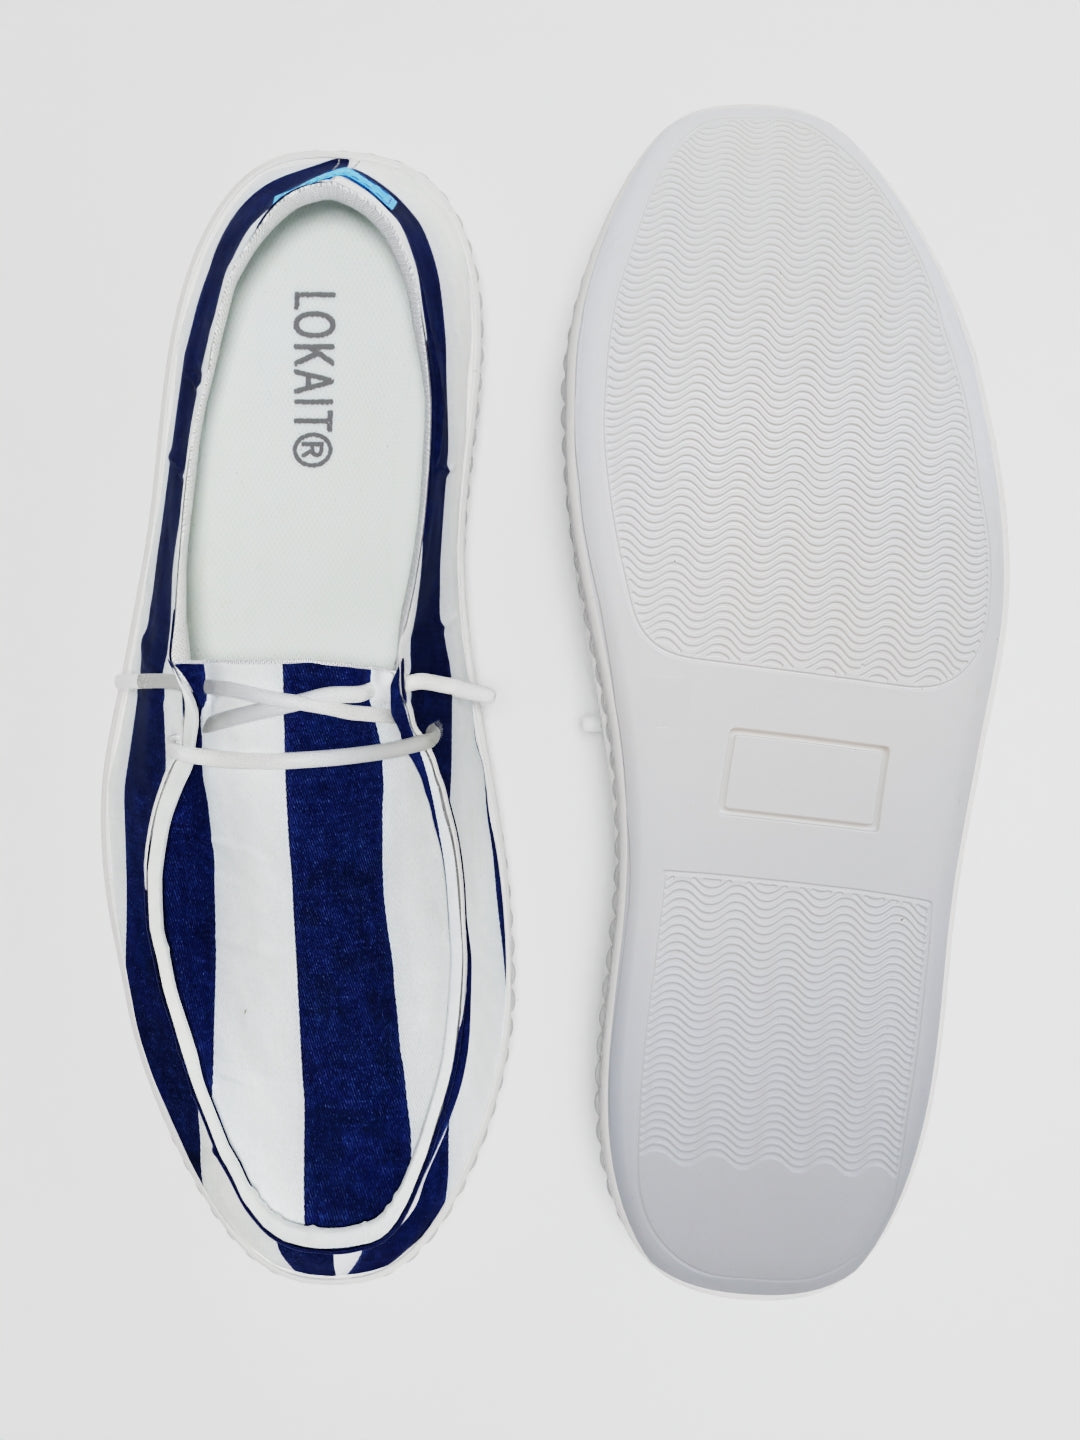 The Luna Navy and White Stripes